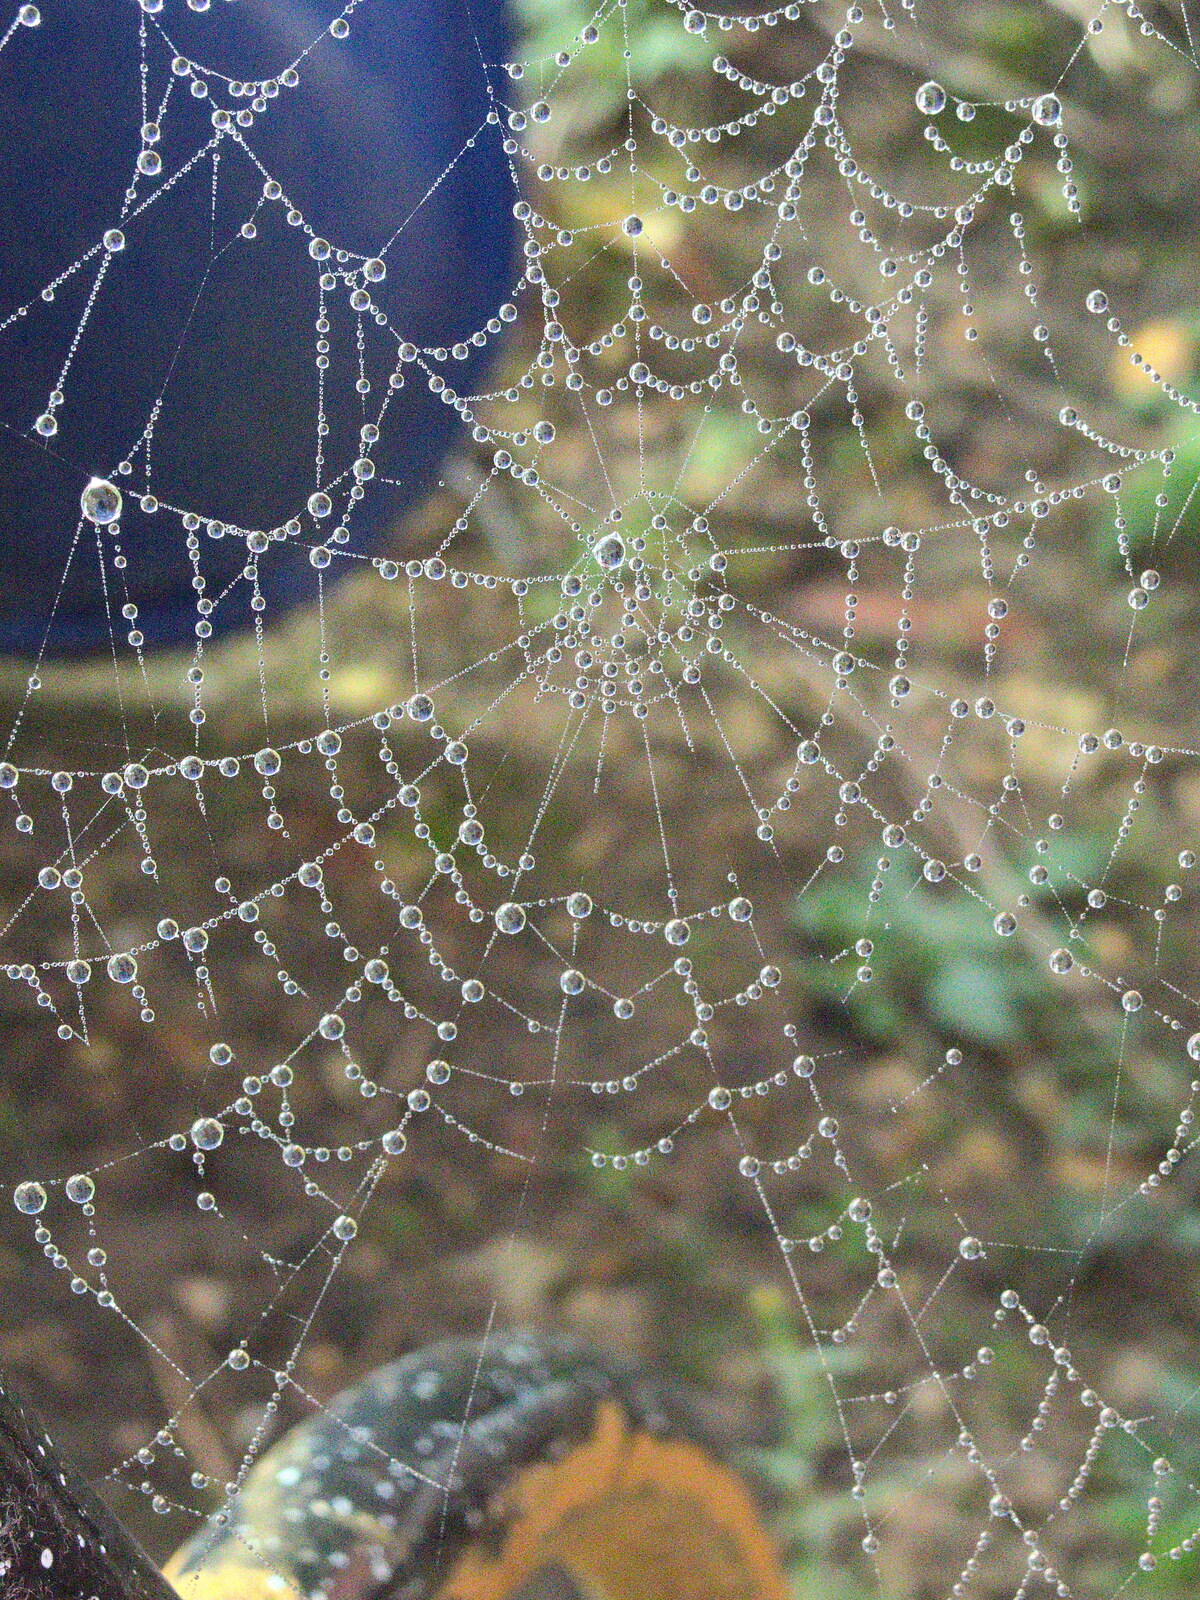 A very dewy spider web from John Willy's 65th and Other Stories, The Swan, Brome, Suffolk - 31st October 2015